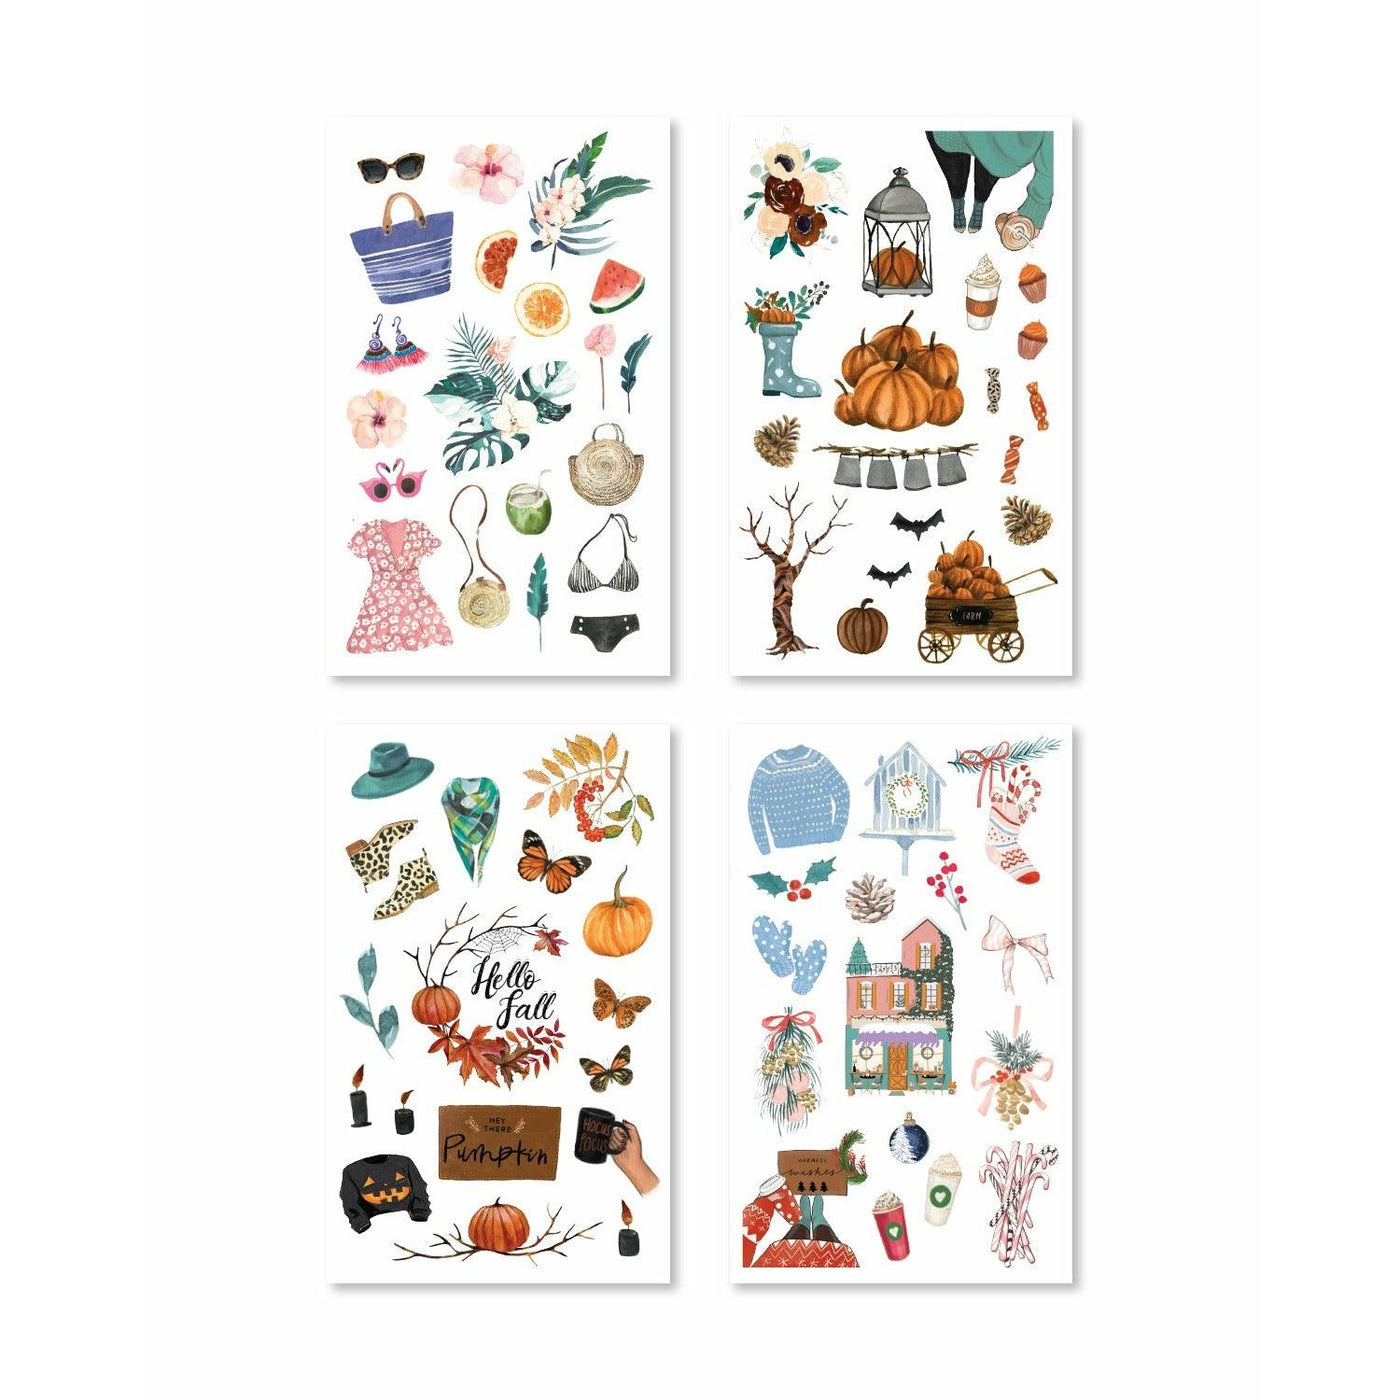 "I Can & I Will" Sticker Book | Happy Planner Stickers | Shop Rongrong 